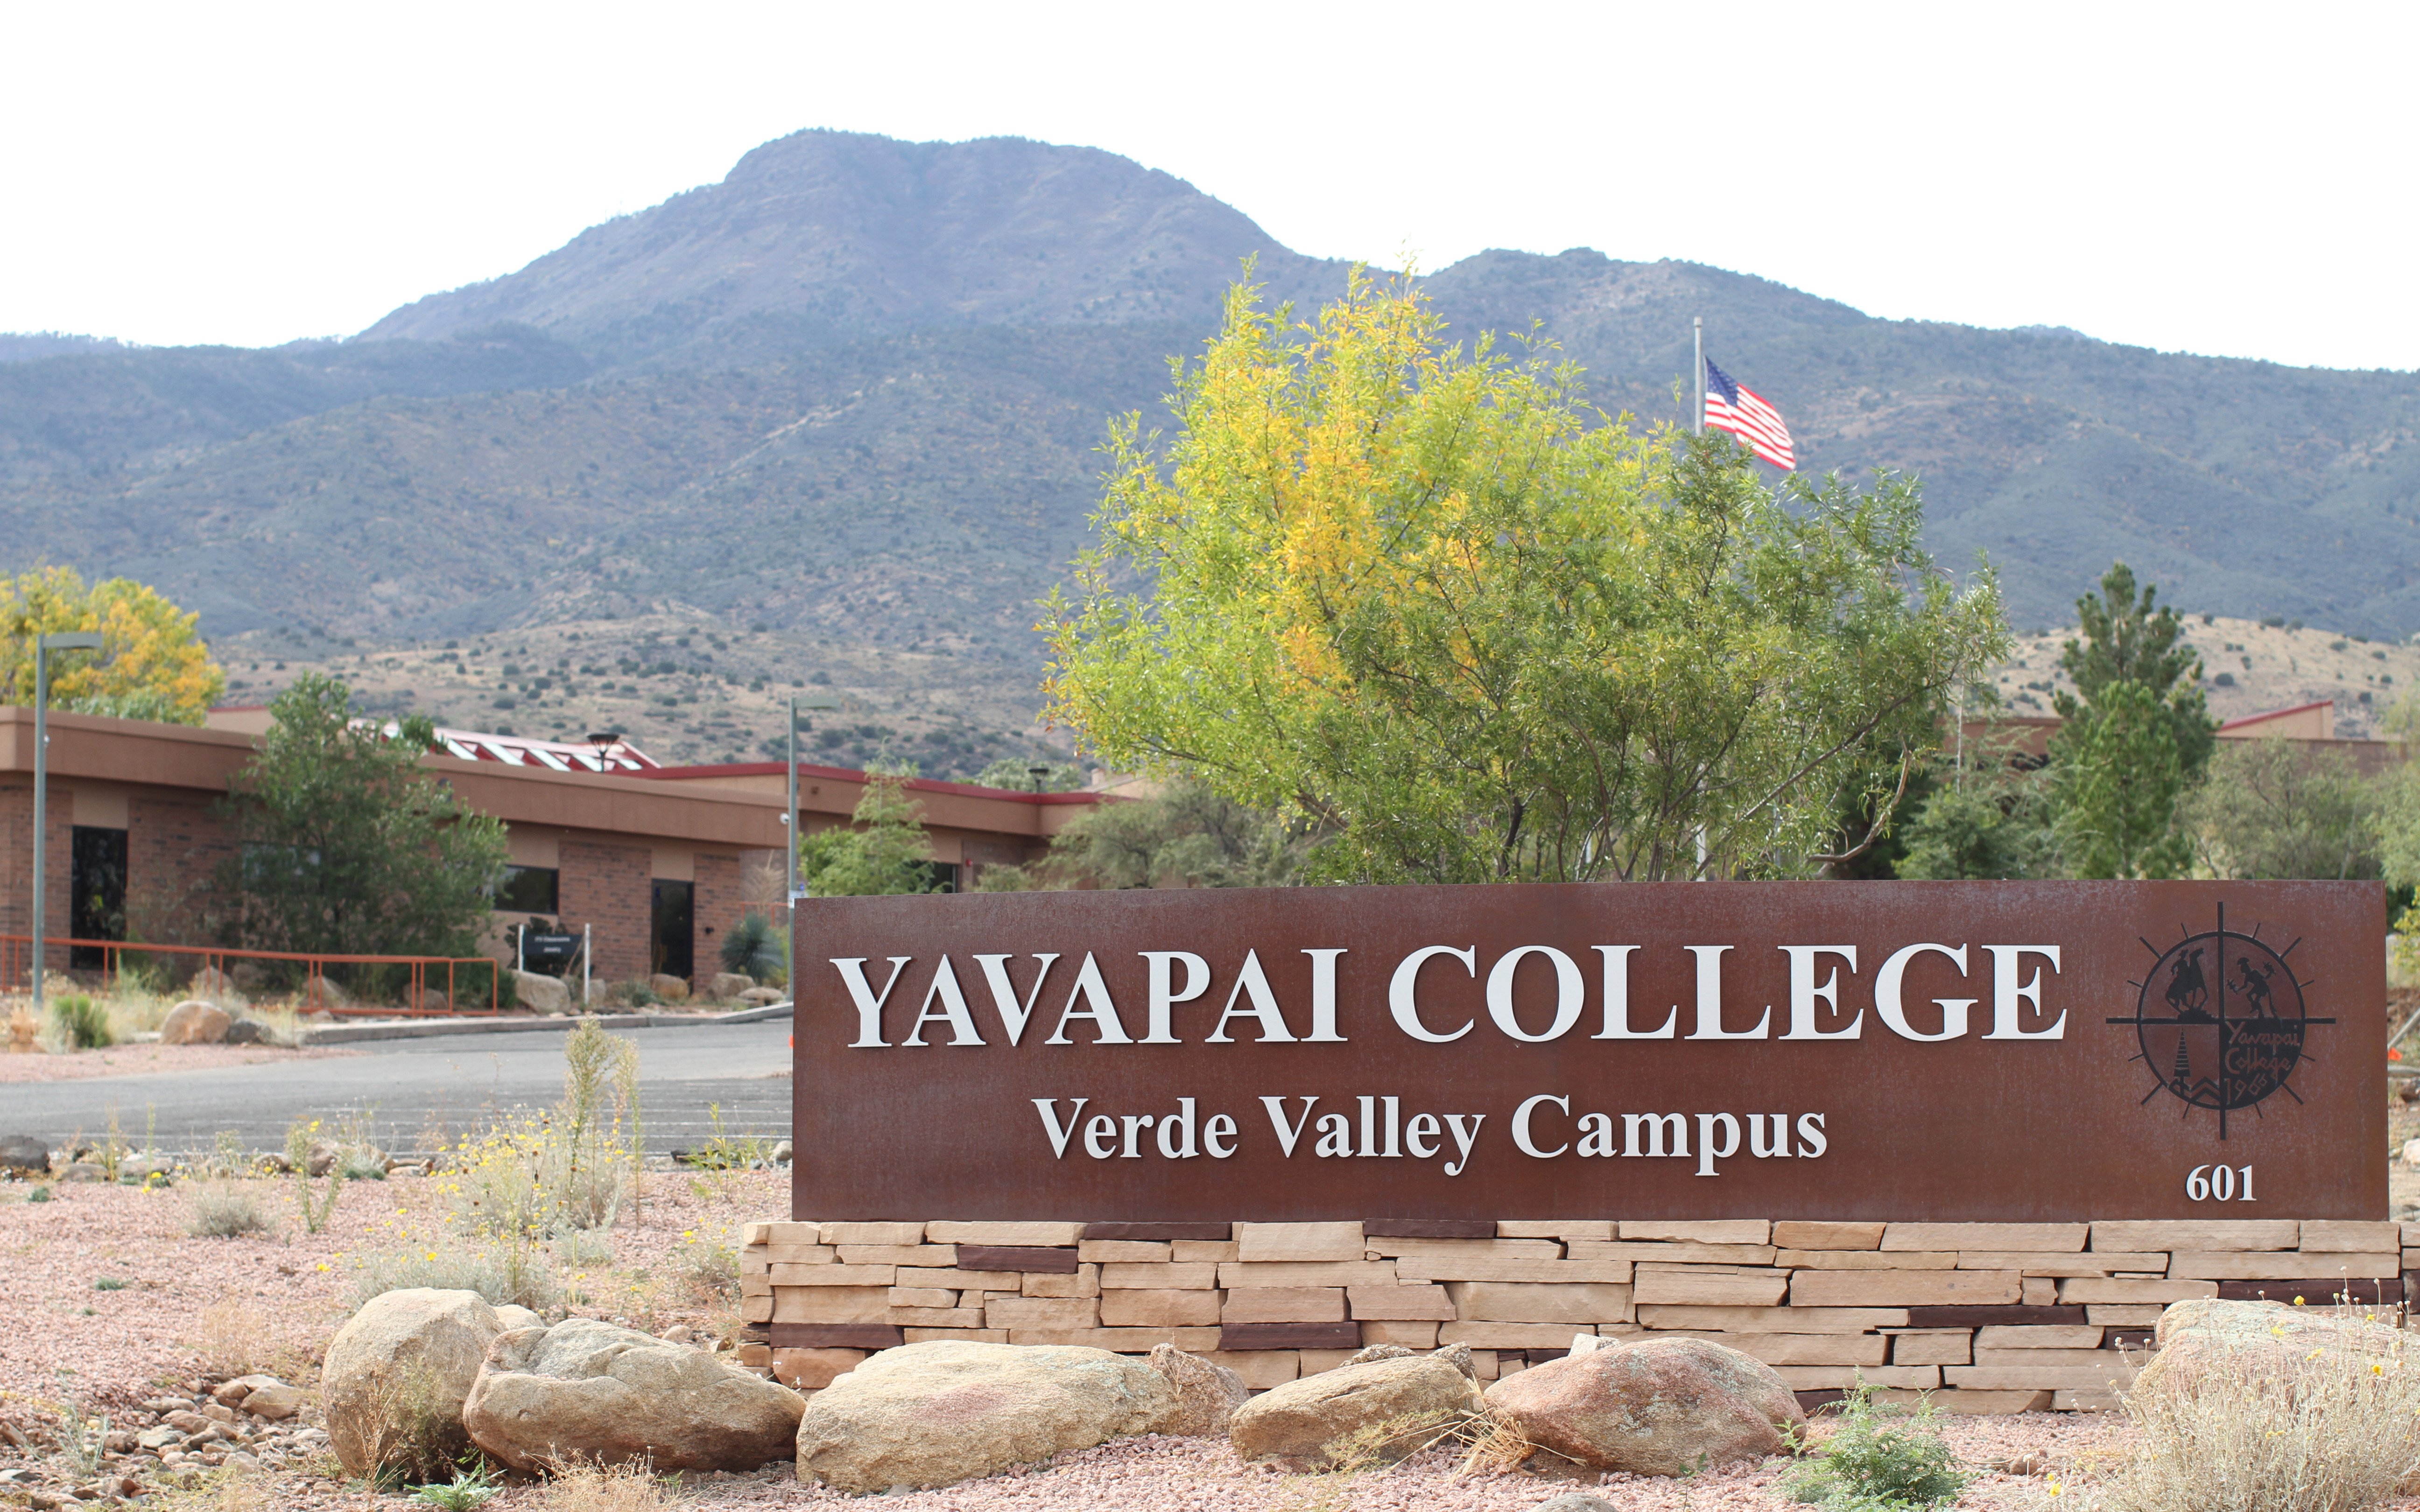 Yavapai College - Verde Valley Campus offers free GED prep courses in Spanish for U.S. citizens and legal residents. (Photo by Cassie Ronda/PIN Bureau)